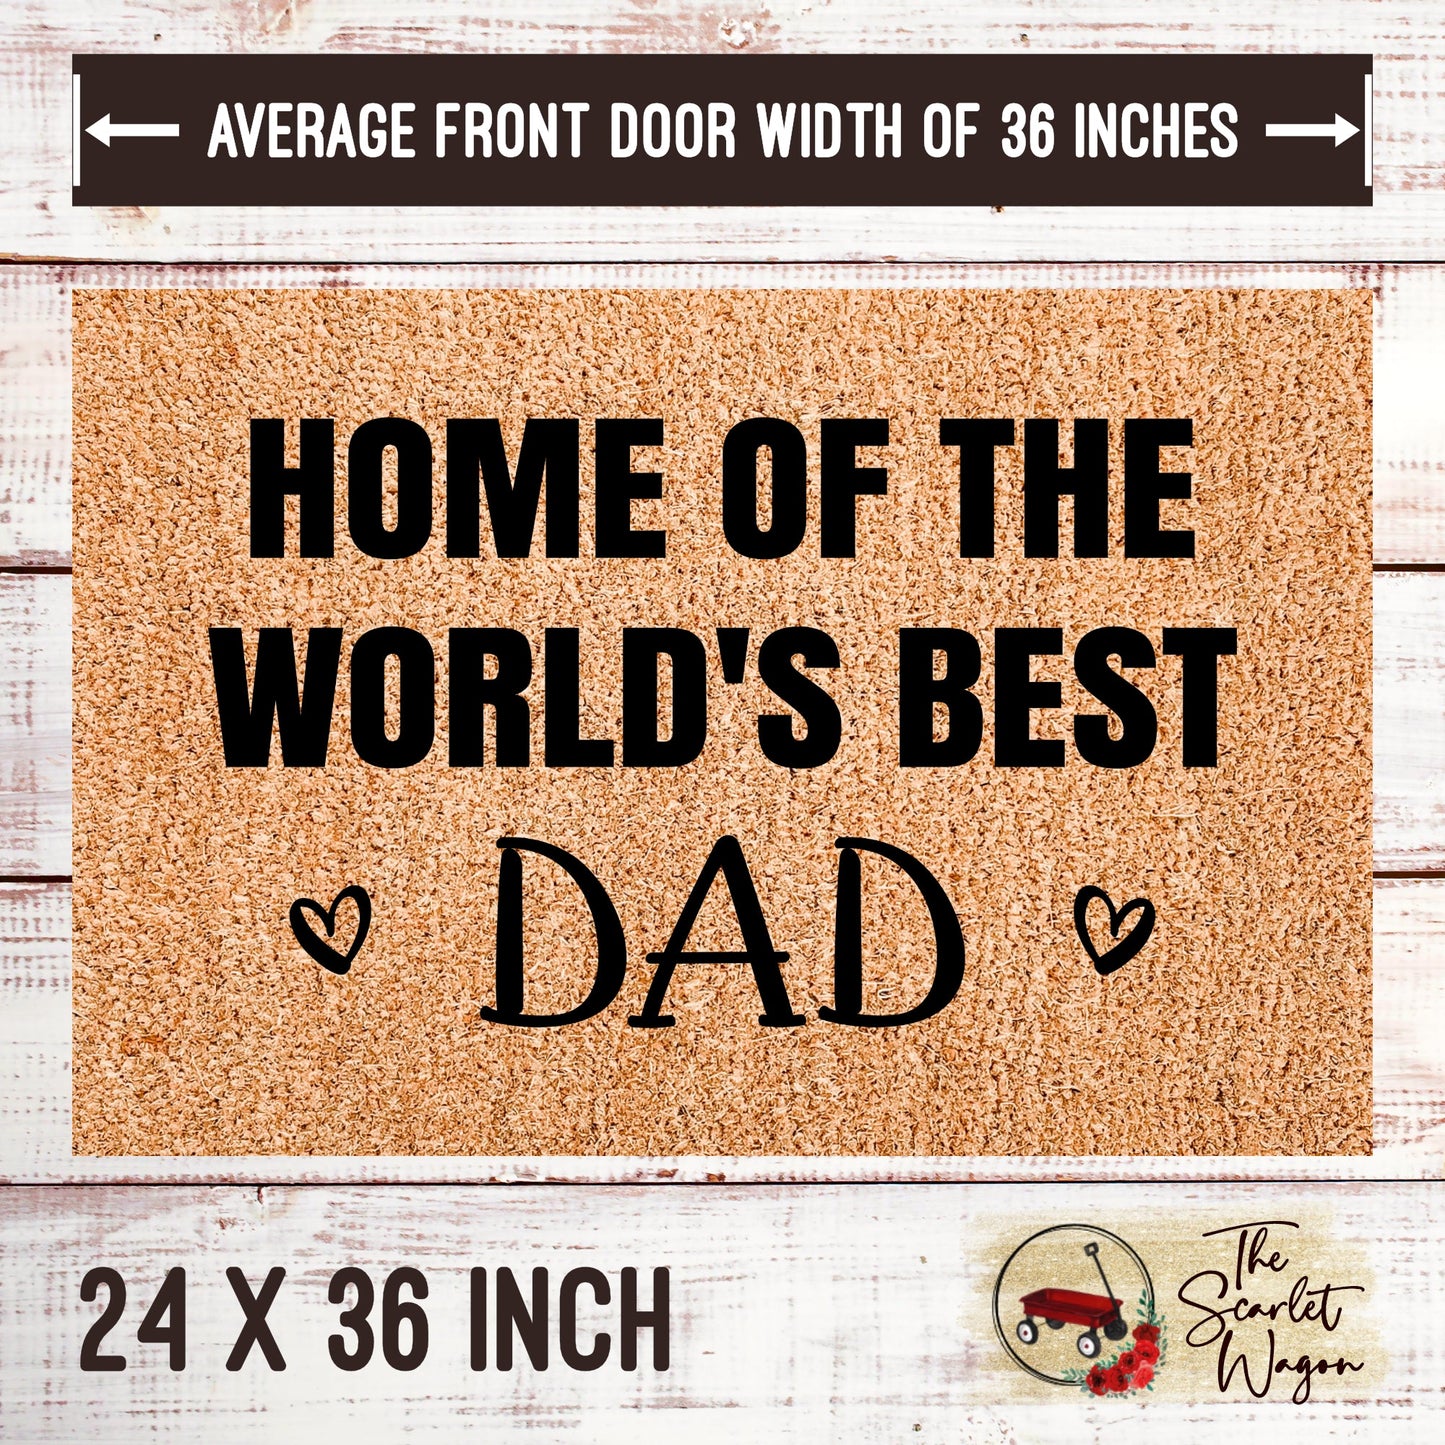 Home of the World's Best Dad Door Mats teelaunch 24x36 Inches (Free Shipping) 